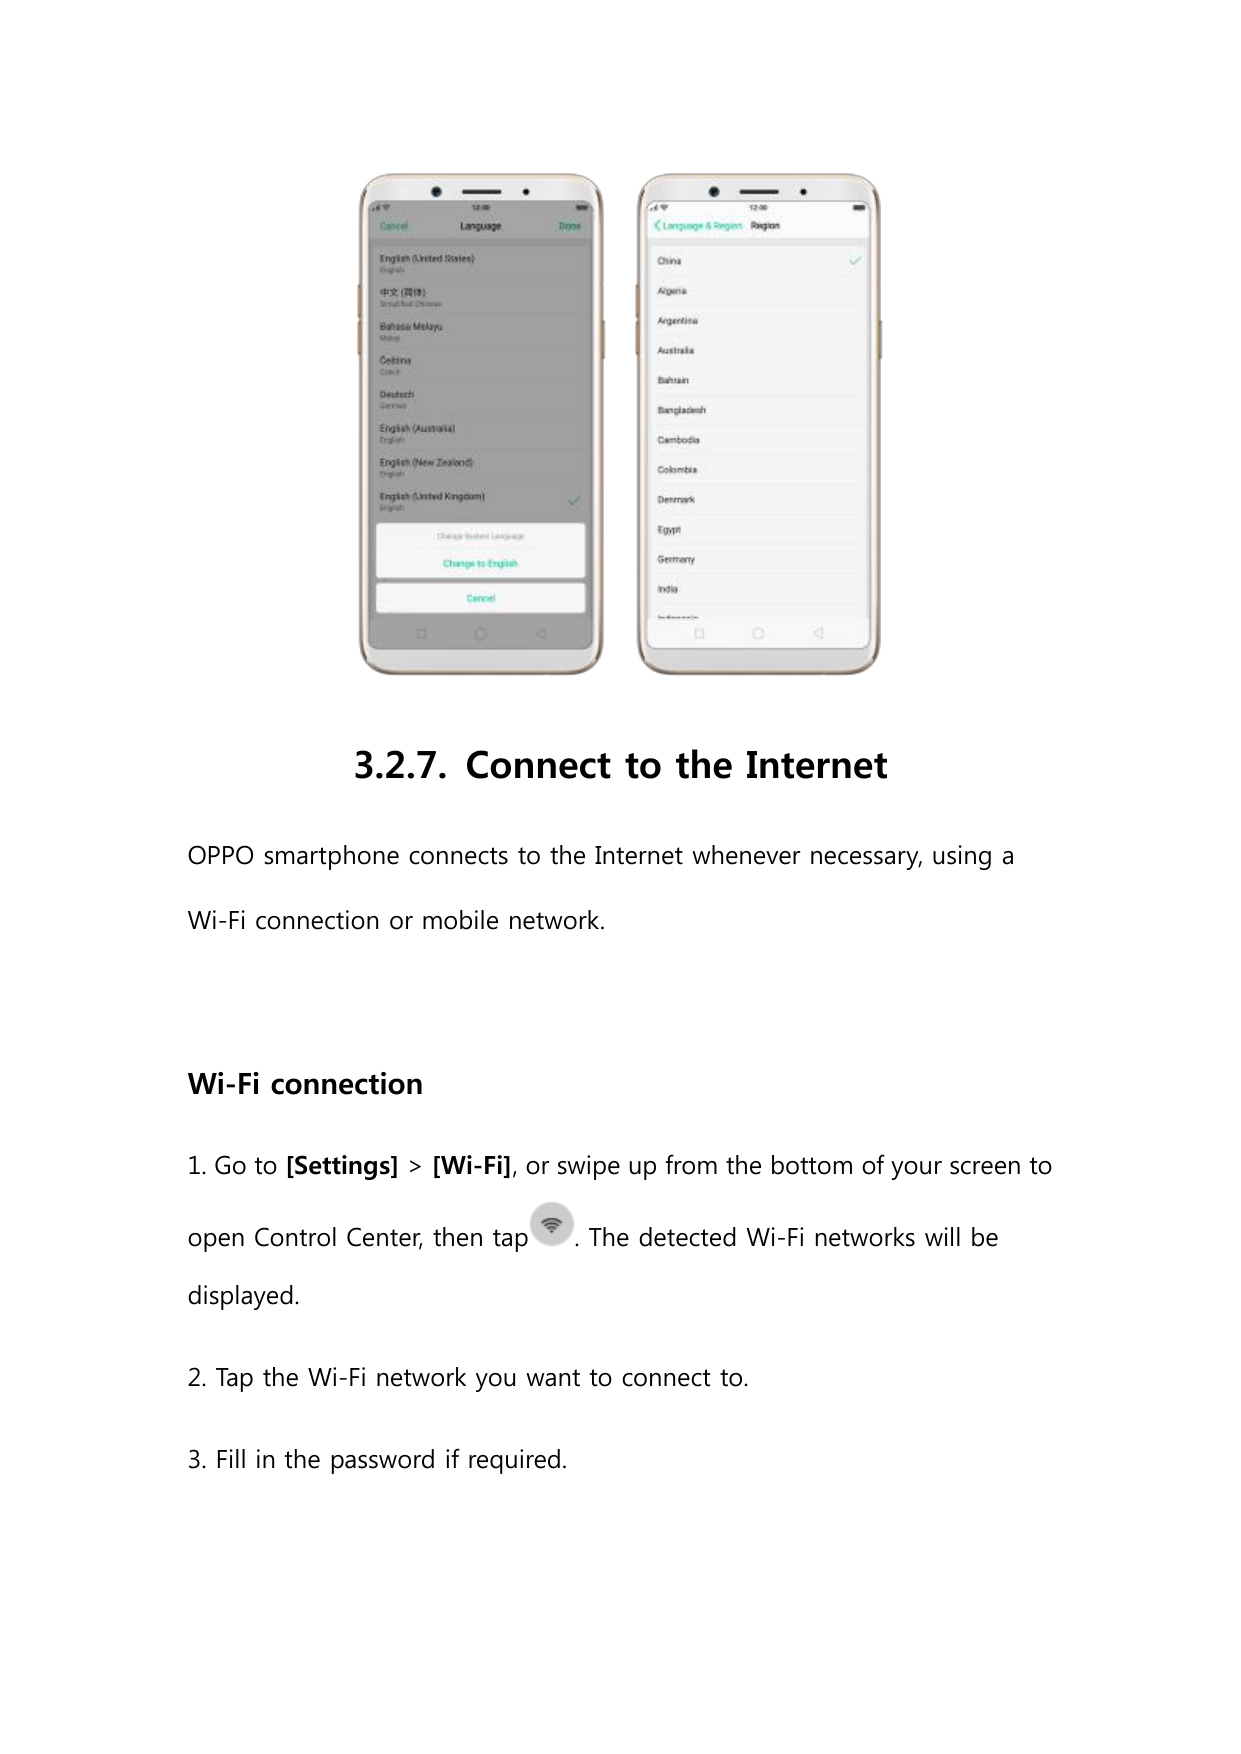 3.2.7. Connect to the InternetOPPO smartphone connects to the Internet whenever necessary, using aWi-Fi connection or mobile net